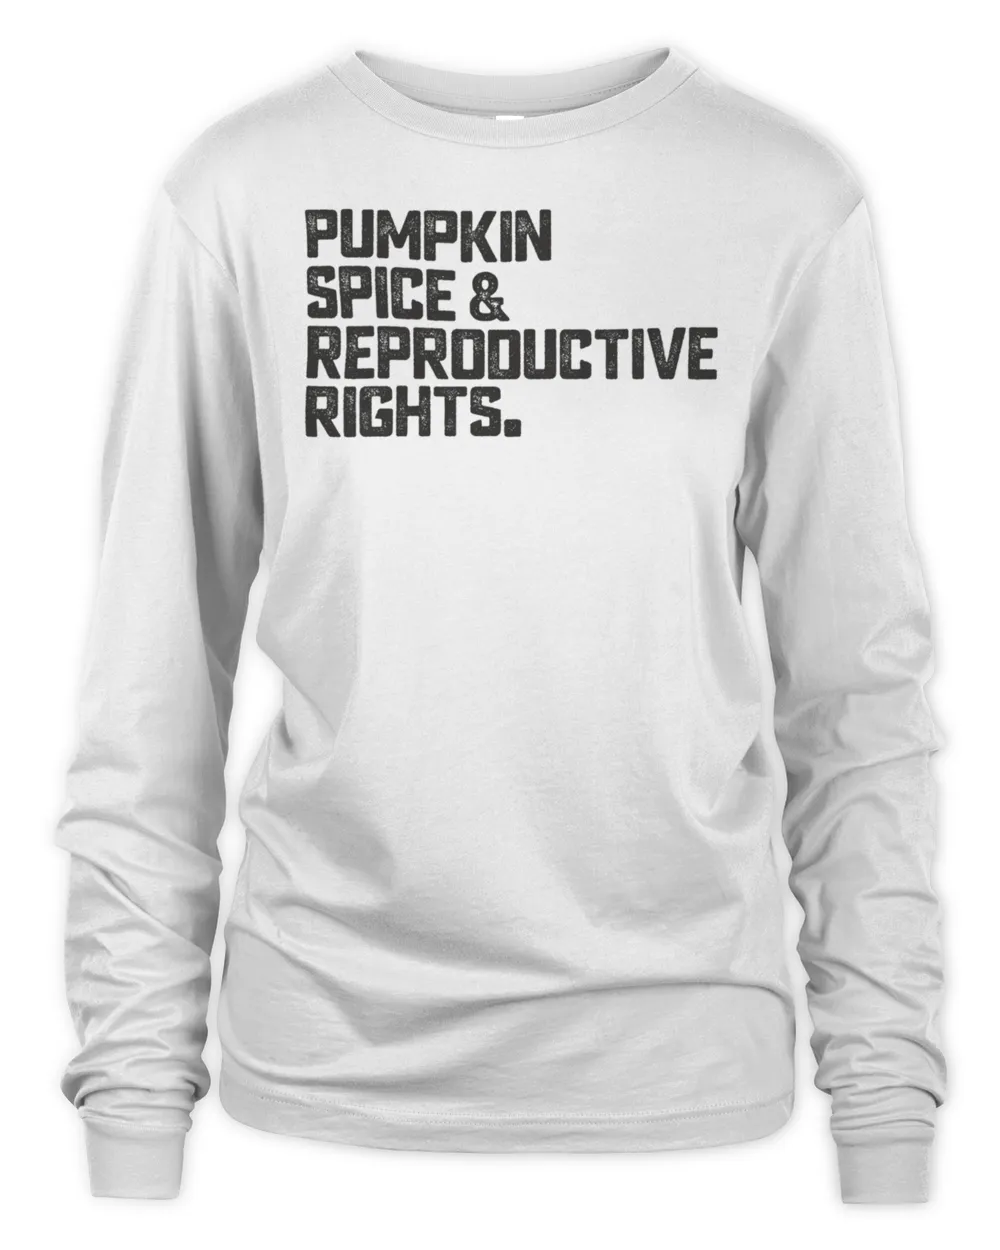 Pumpkin Spice and Reproductive Rights for Women Feminist Slogan T-Shirt